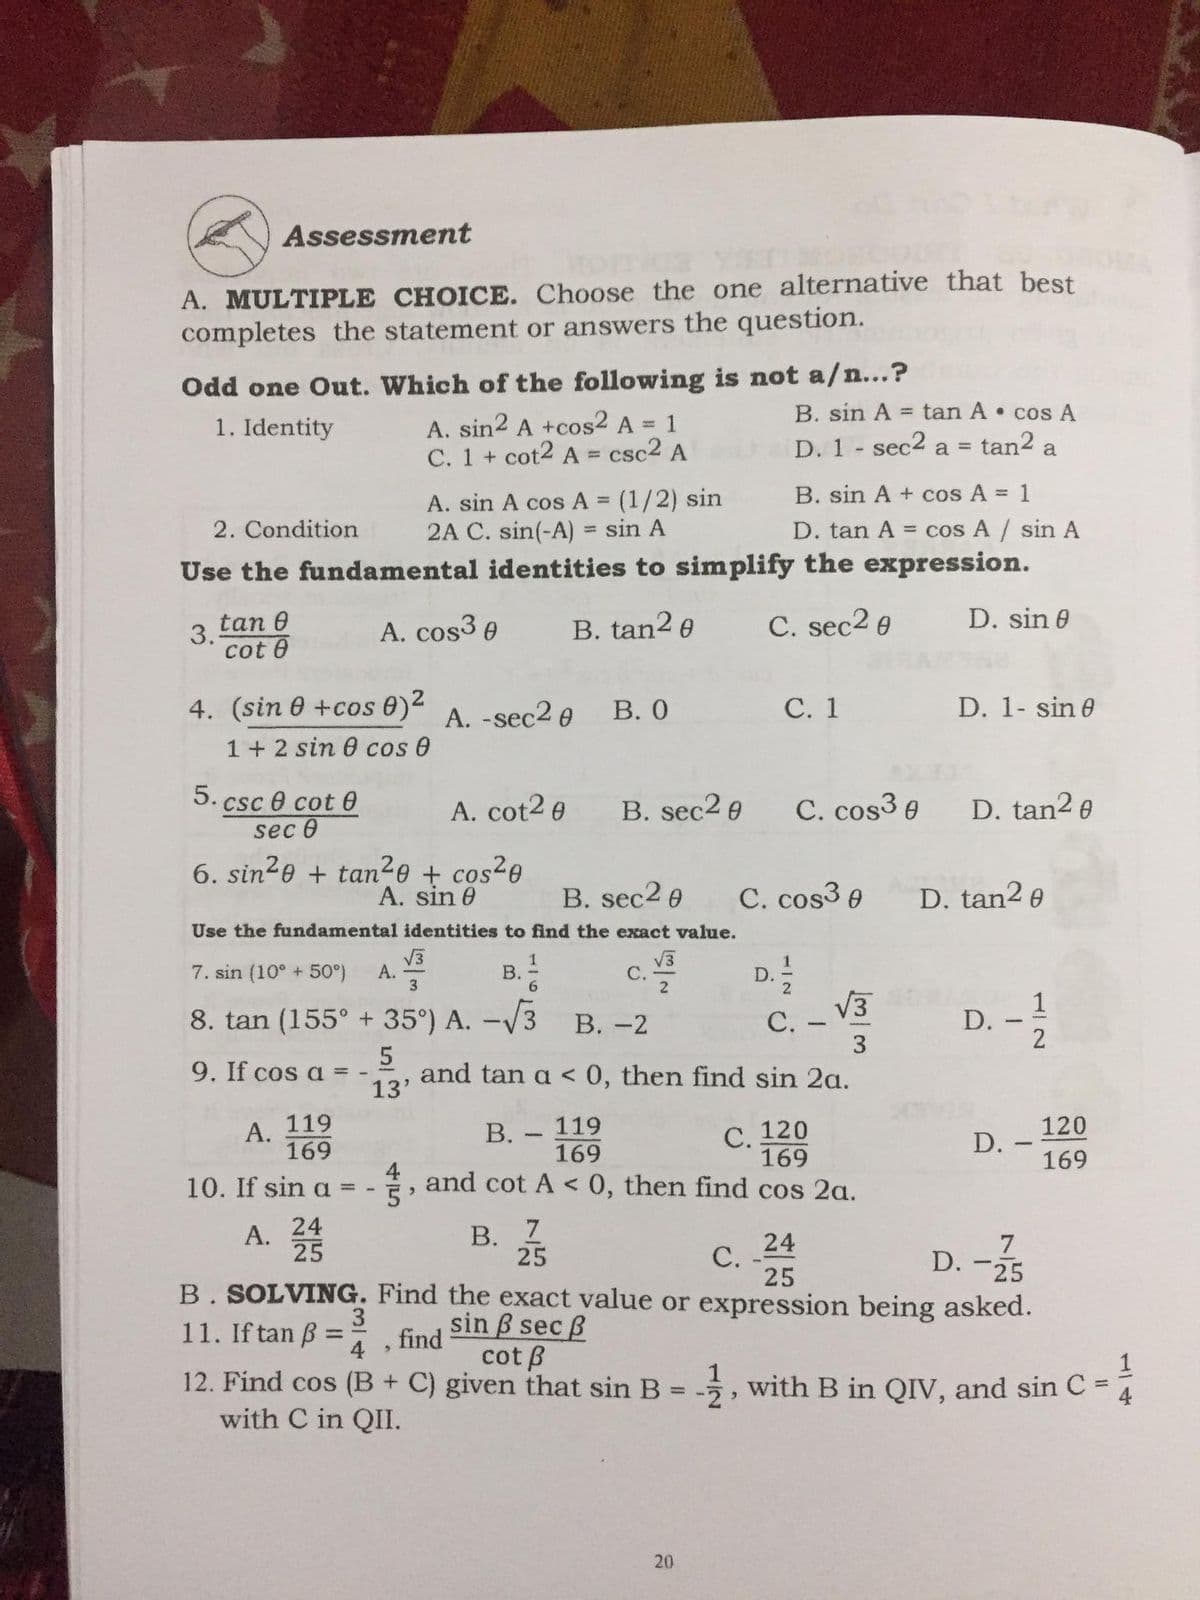 Assessment
to
A. MULTIPLE CHOICE. Choose the one alternative that best
completes the statement or answers the question.
Odd one Out. Which of the following is not a/n...?
A. sin2 A +cos2 A = 1
C. 1 + cot2 A = csc2 A
B. sin A
= tan A • cos A
1. Identity
%3D
D. 1 sec2 a =
tan2 a
B. sin A + cos A =
A. sin A cos A = (1/2) sin
2A C. sin(-A) = sin A
Use the fundamental identities to simplify the expression.
%3D
2. Condition
D. tan A cos A / sin A
%3D
tan 0
3.
cot 0
A. cos³ e
B. tan2 e
C. sec2 e
D. sin 0
4. (sin 0 +cos 0) A. -sec2e B. 0
С. 1
D. 1- sin e
1 + 2 sin 0 cos 0
5. csc e cot 0
A. cot2 e
B. sec2 e
C. cos3 e
D. tan2 e
sec 0
6. sin2e + tan²e + cos²e
A. sin 0
C. cos3 e
D. tan² e
B. sec2 e
Use the fundamental identities to find the exact value.
c.
7. sin (10° + 50°)
А.
3
В.
6.
С.
D.
8. tan (155° + 35°) A. -/3
C. - V3
В. -2
С. -
D.
9. If cos a = -
13'
and tan a < 0, then find sin 2a.
А. 119
169
119
169
В.
120
120
С.
169
and cot A < 0, then find cos 2a.
D. -
169
10. If sin a =
5'
В. 7
25
A.
24
24
7
25
B. SOLVING. Find the exact value or expression being asked.
25
C. 25
С.
3
11. If tan B =
sin B sec B
cot B
find
12. Find cos (B+ C) given that sin B:
with C in QII.
1
5, with B in QIV, and sin C =
%3D
4
20
112
